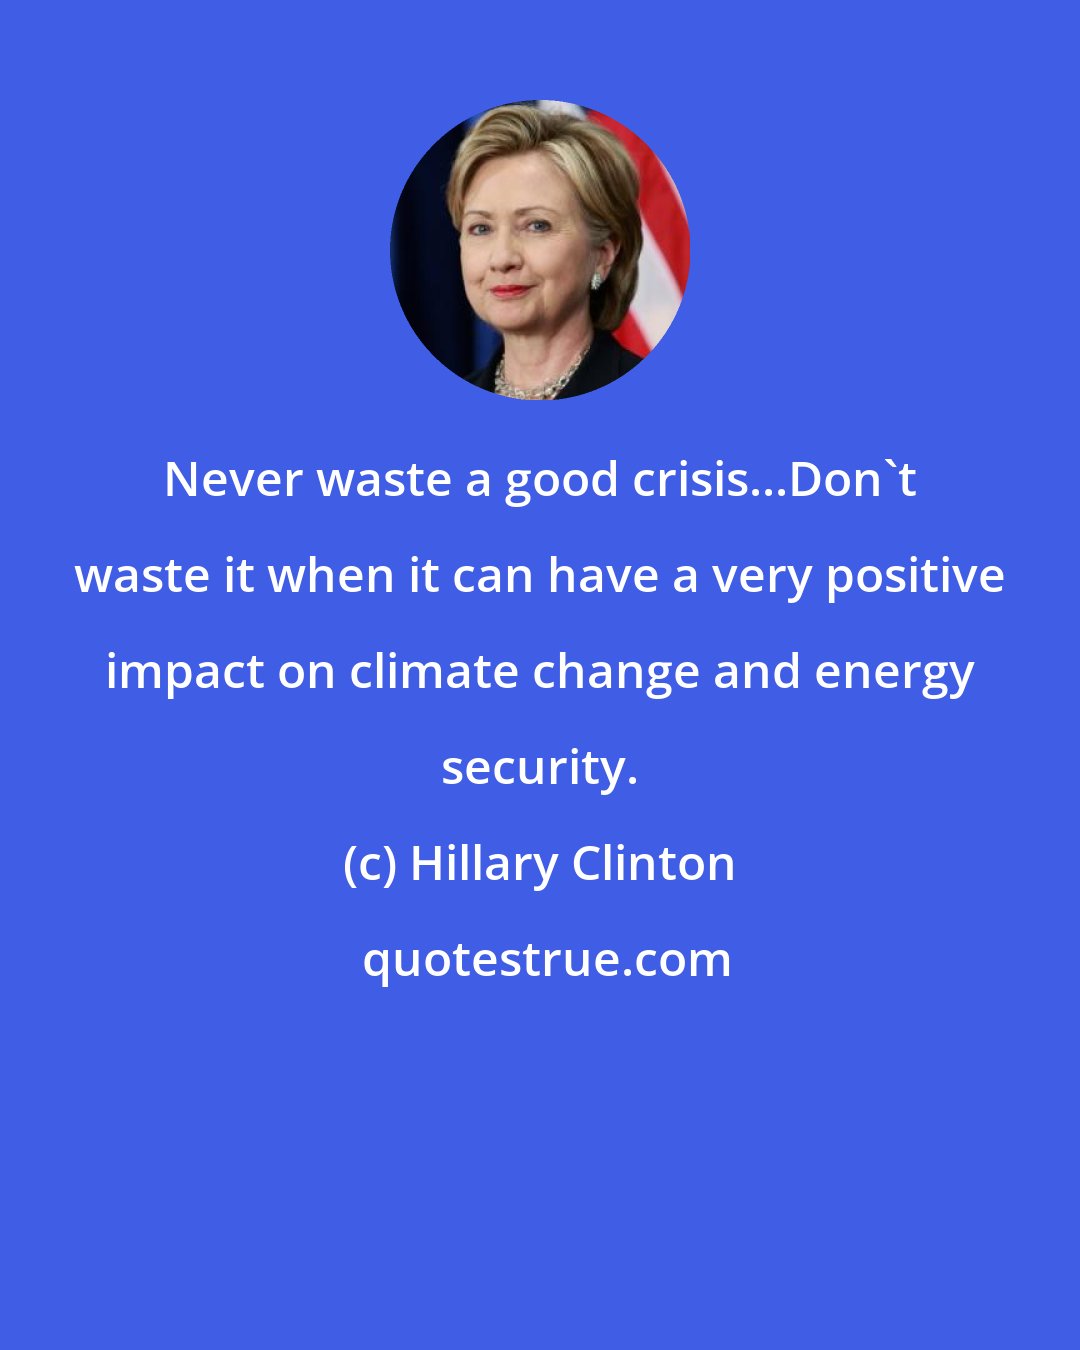 Hillary Clinton: Never waste a good crisis...Don't waste it when it can have a very positive impact on climate change and energy security.